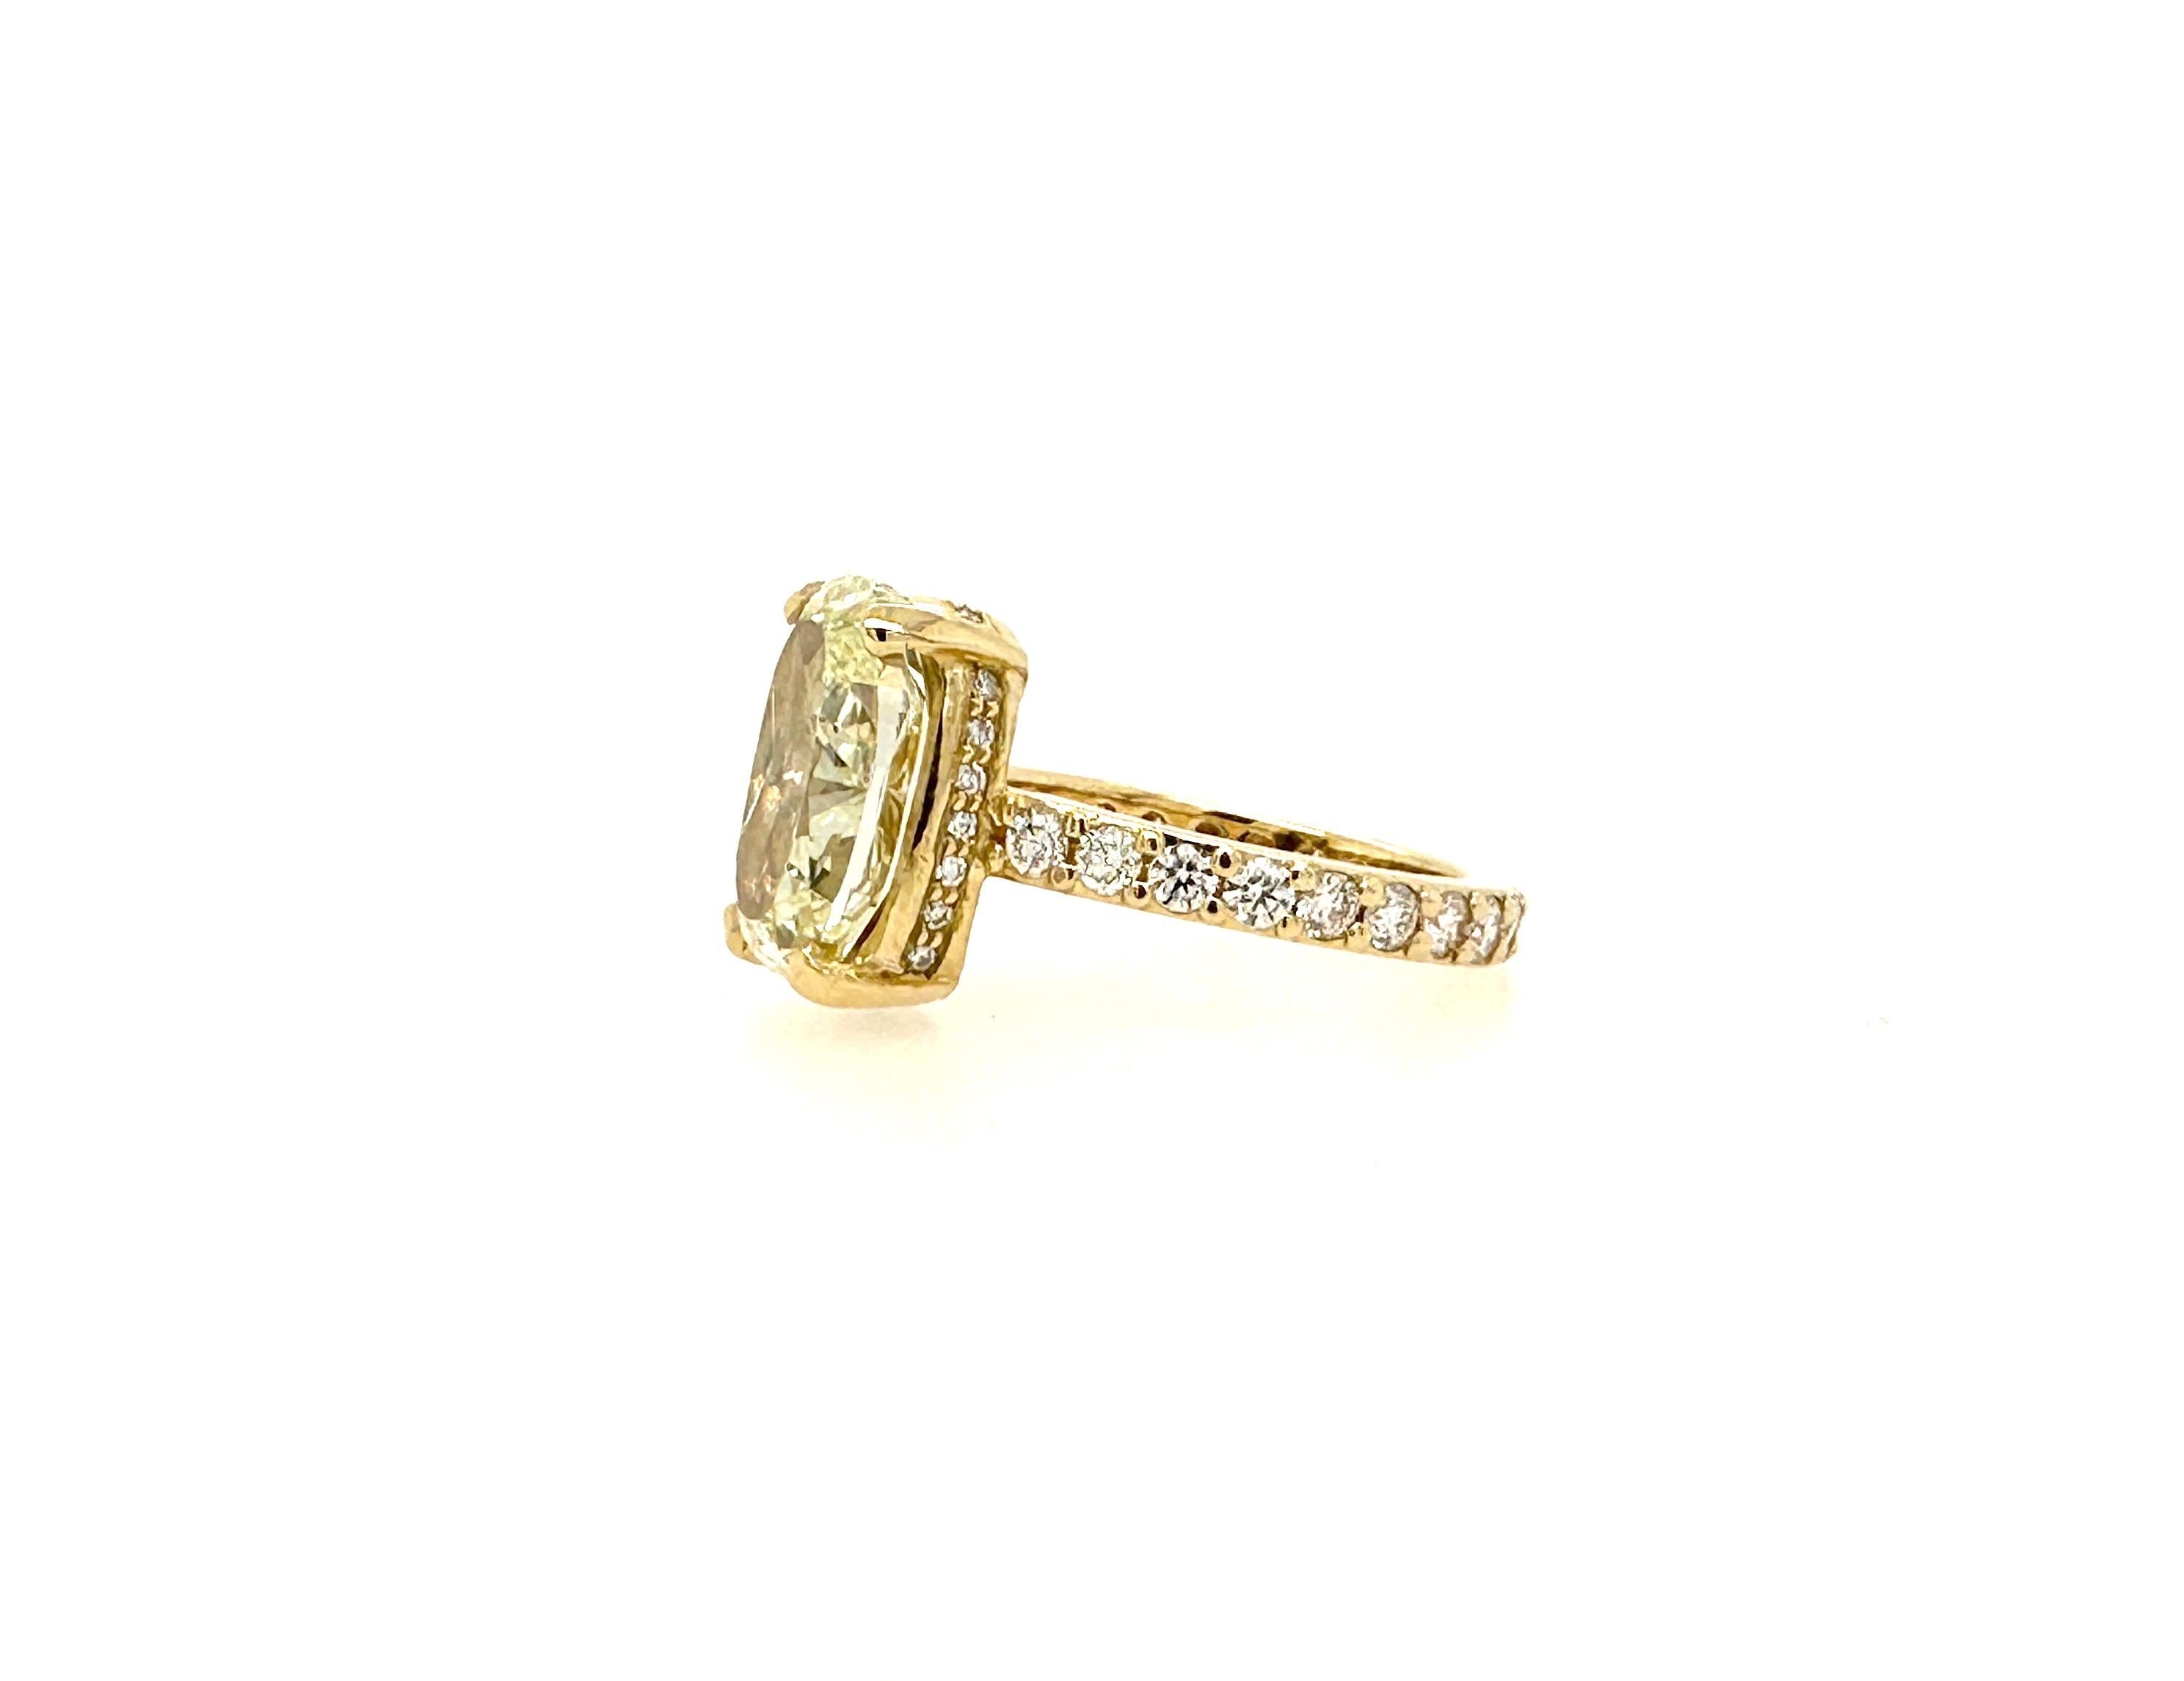 Fancy light yellow oval shape diamond weighing 4.31 carat set in 18k yellow gold hidden halo ring with approximately 1.5 carat total weight of white (F-G) VS1 diamonds.
This oval is longer and thinner than usual to give a bigger look.
Center diamond